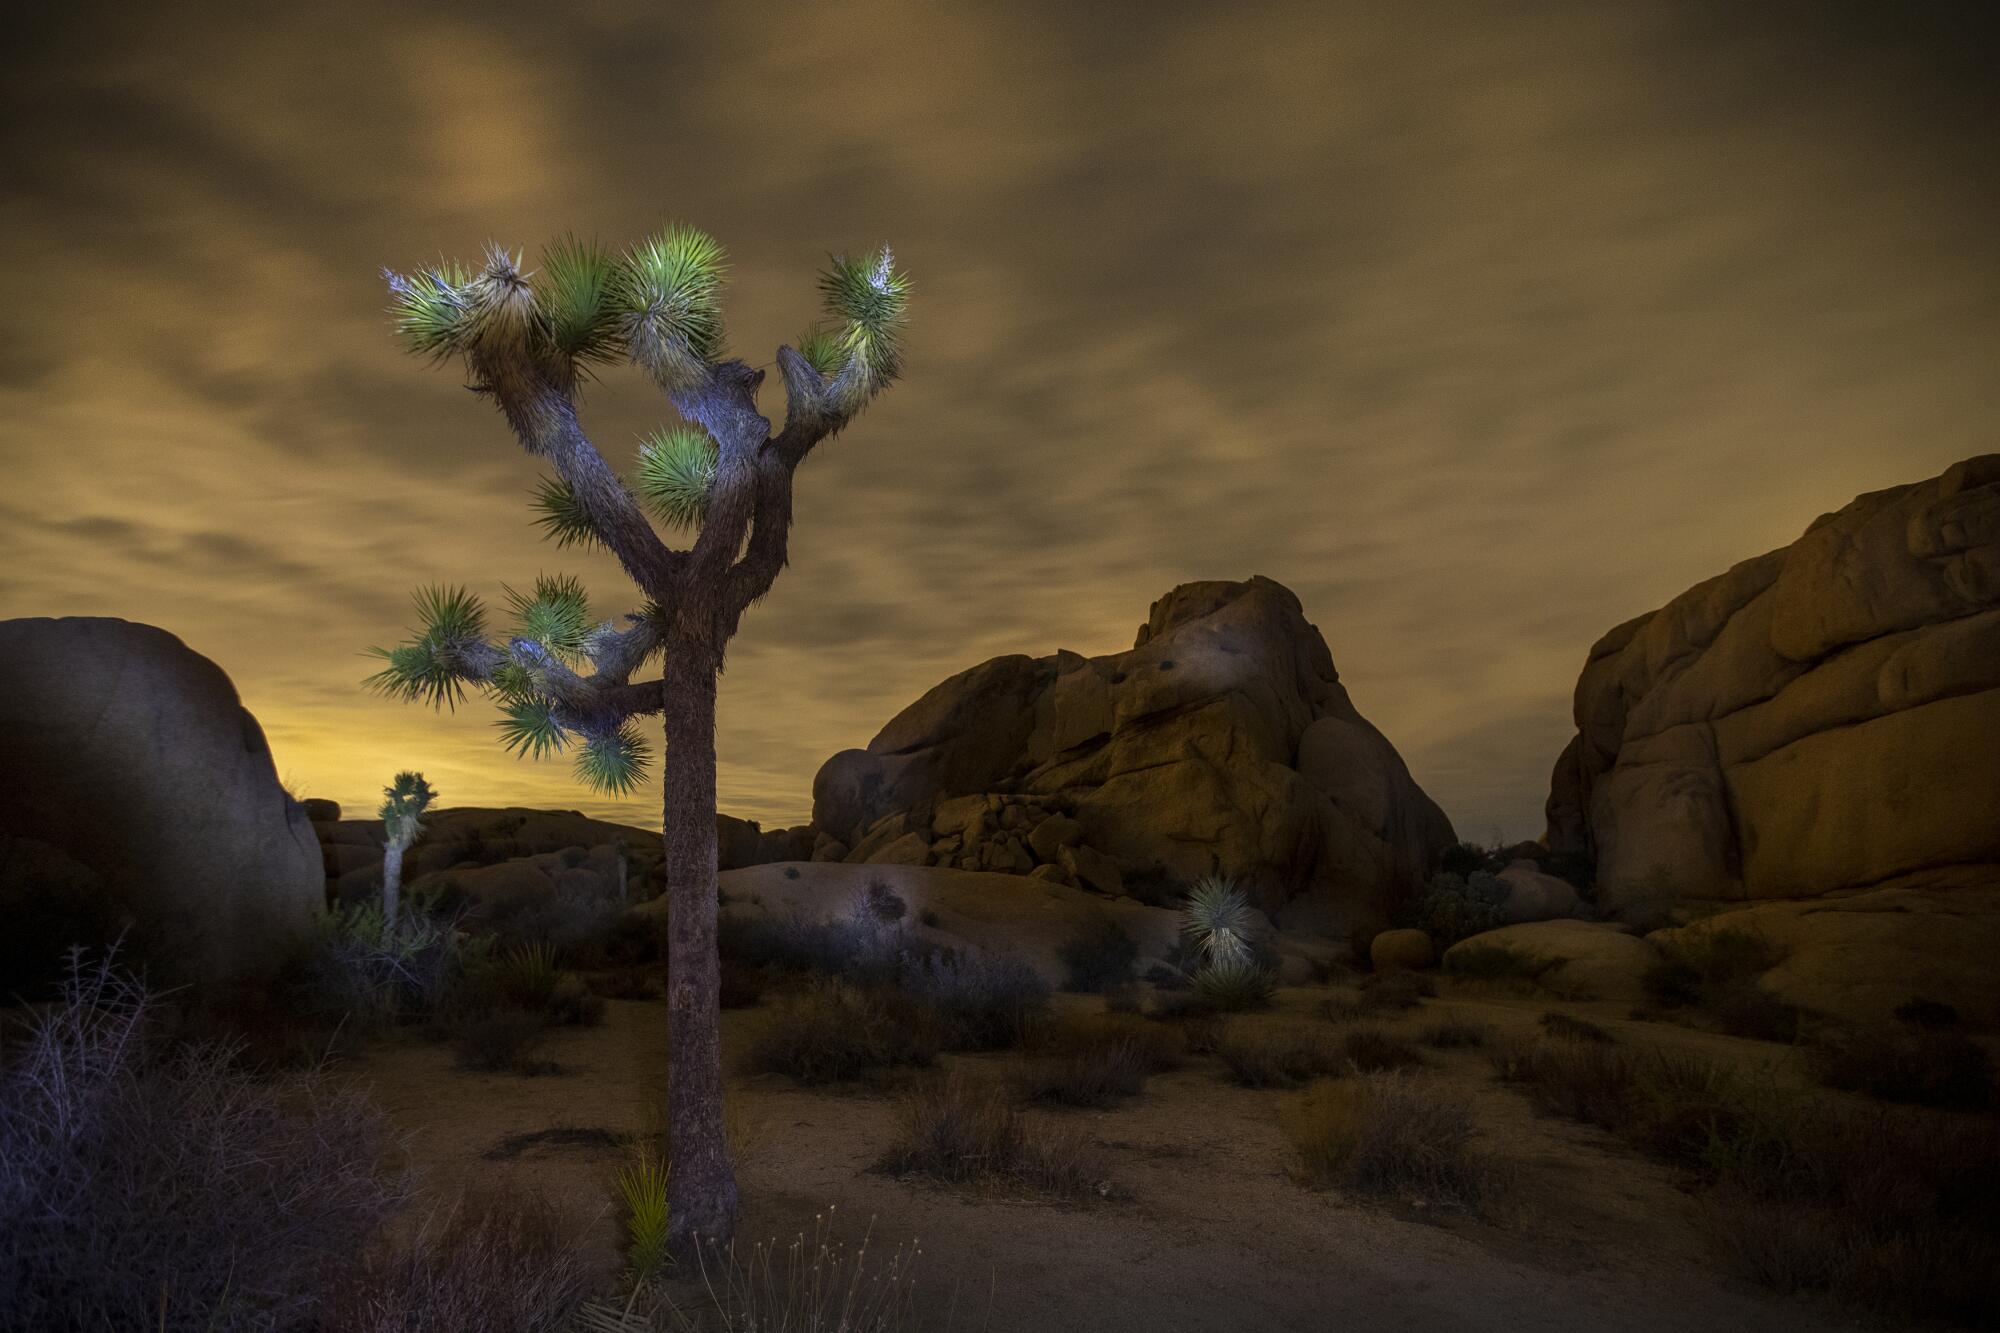 A super flower blood moon is obscured by clouds early Wednesday in Joshua Tree National Park.